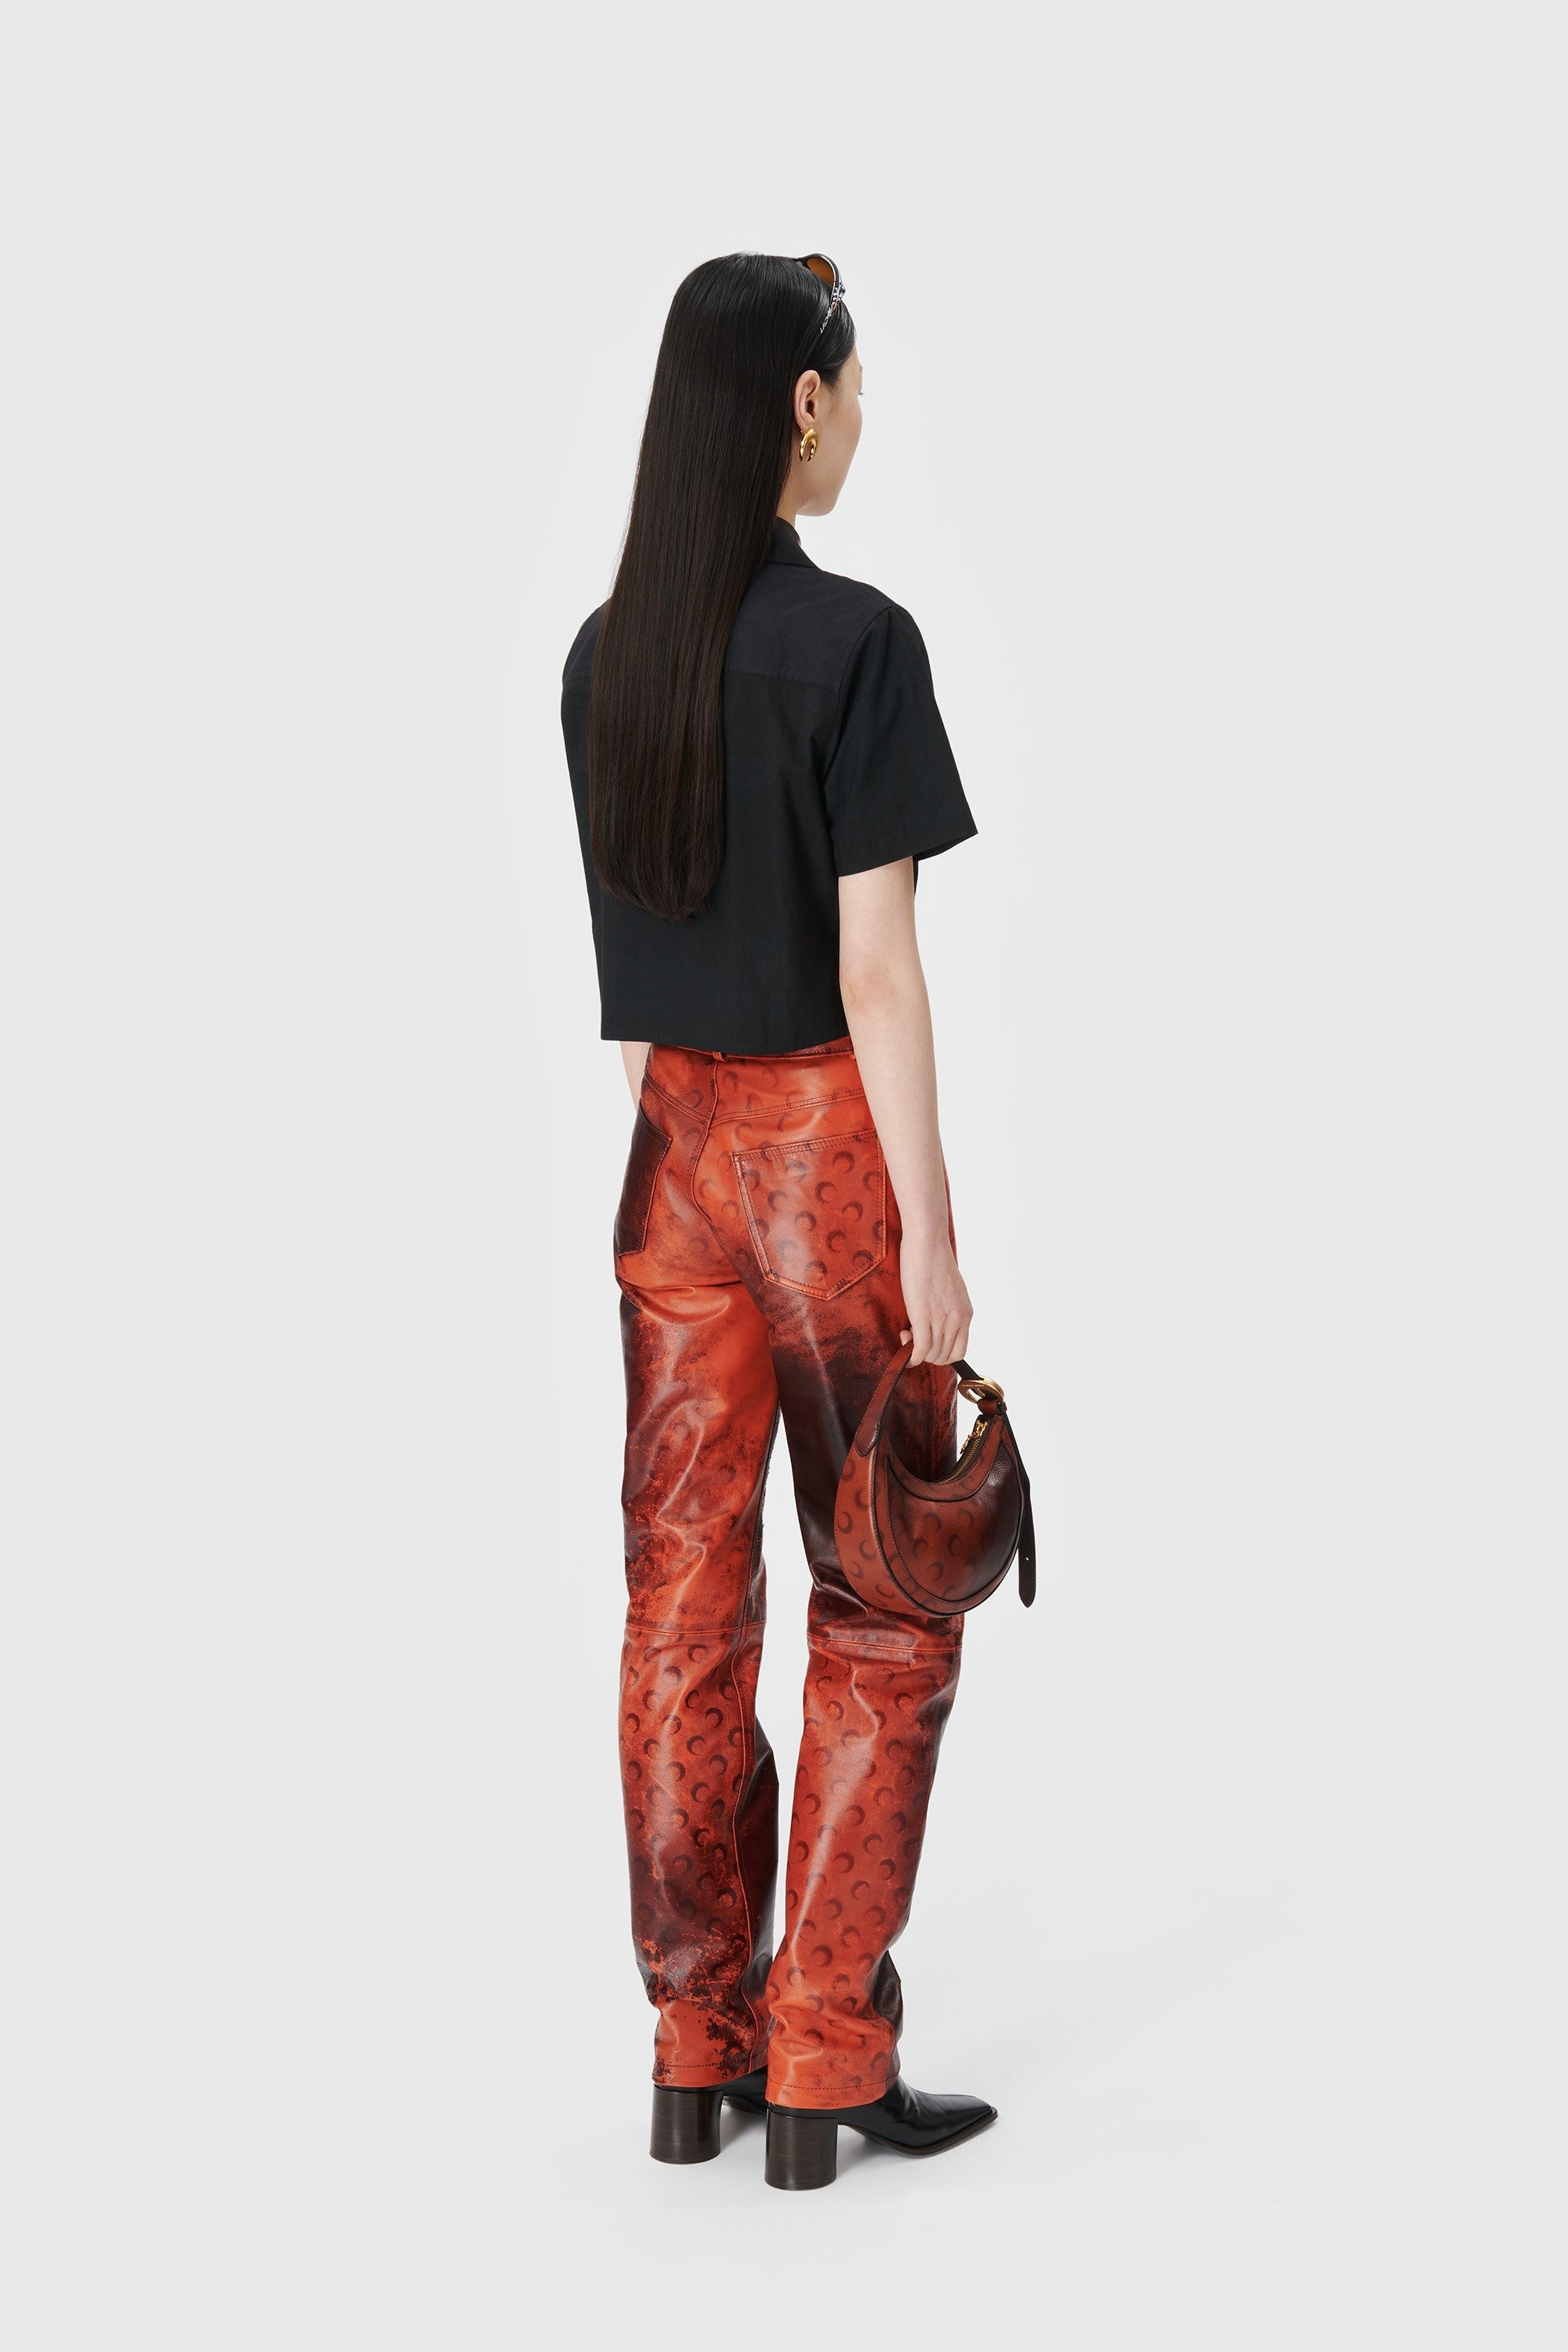 Airbrushed Crafted Leather Straight Leg Pants